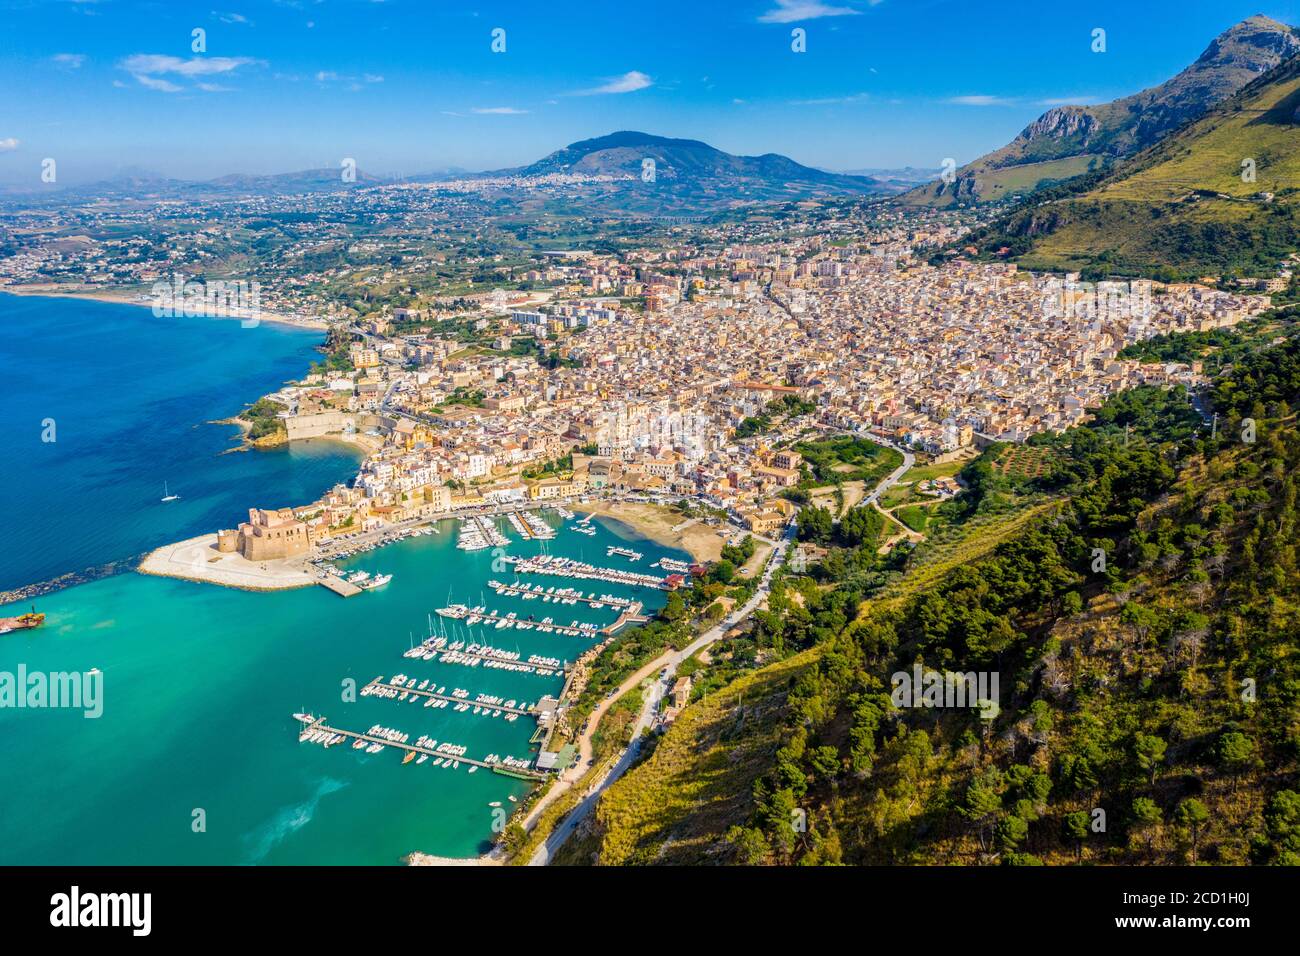 Aerial view of Castellammare del Golfo, a coastal town in the Trapani Province of Sicily, Italy Stock Photo